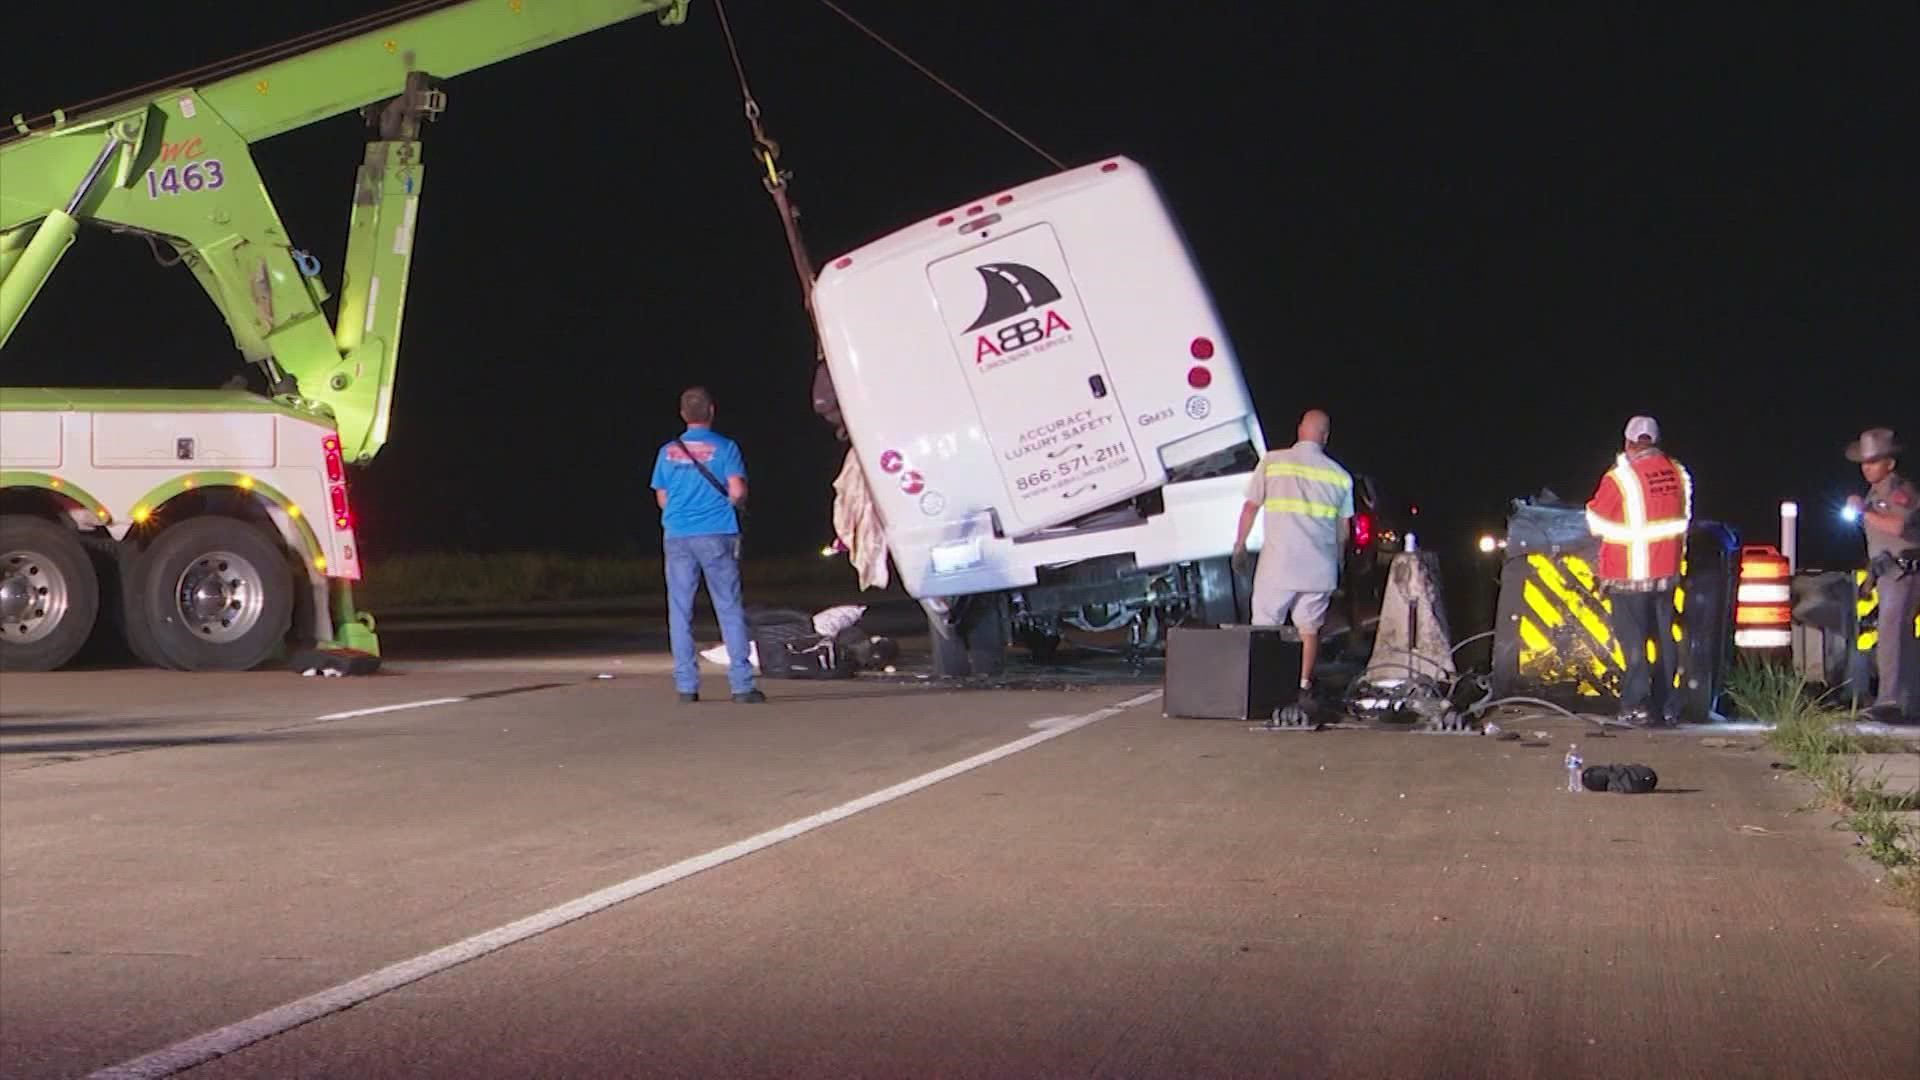 Two people were flown to area hospitals after a rollover bus crash in Waller County on Wednesday night.